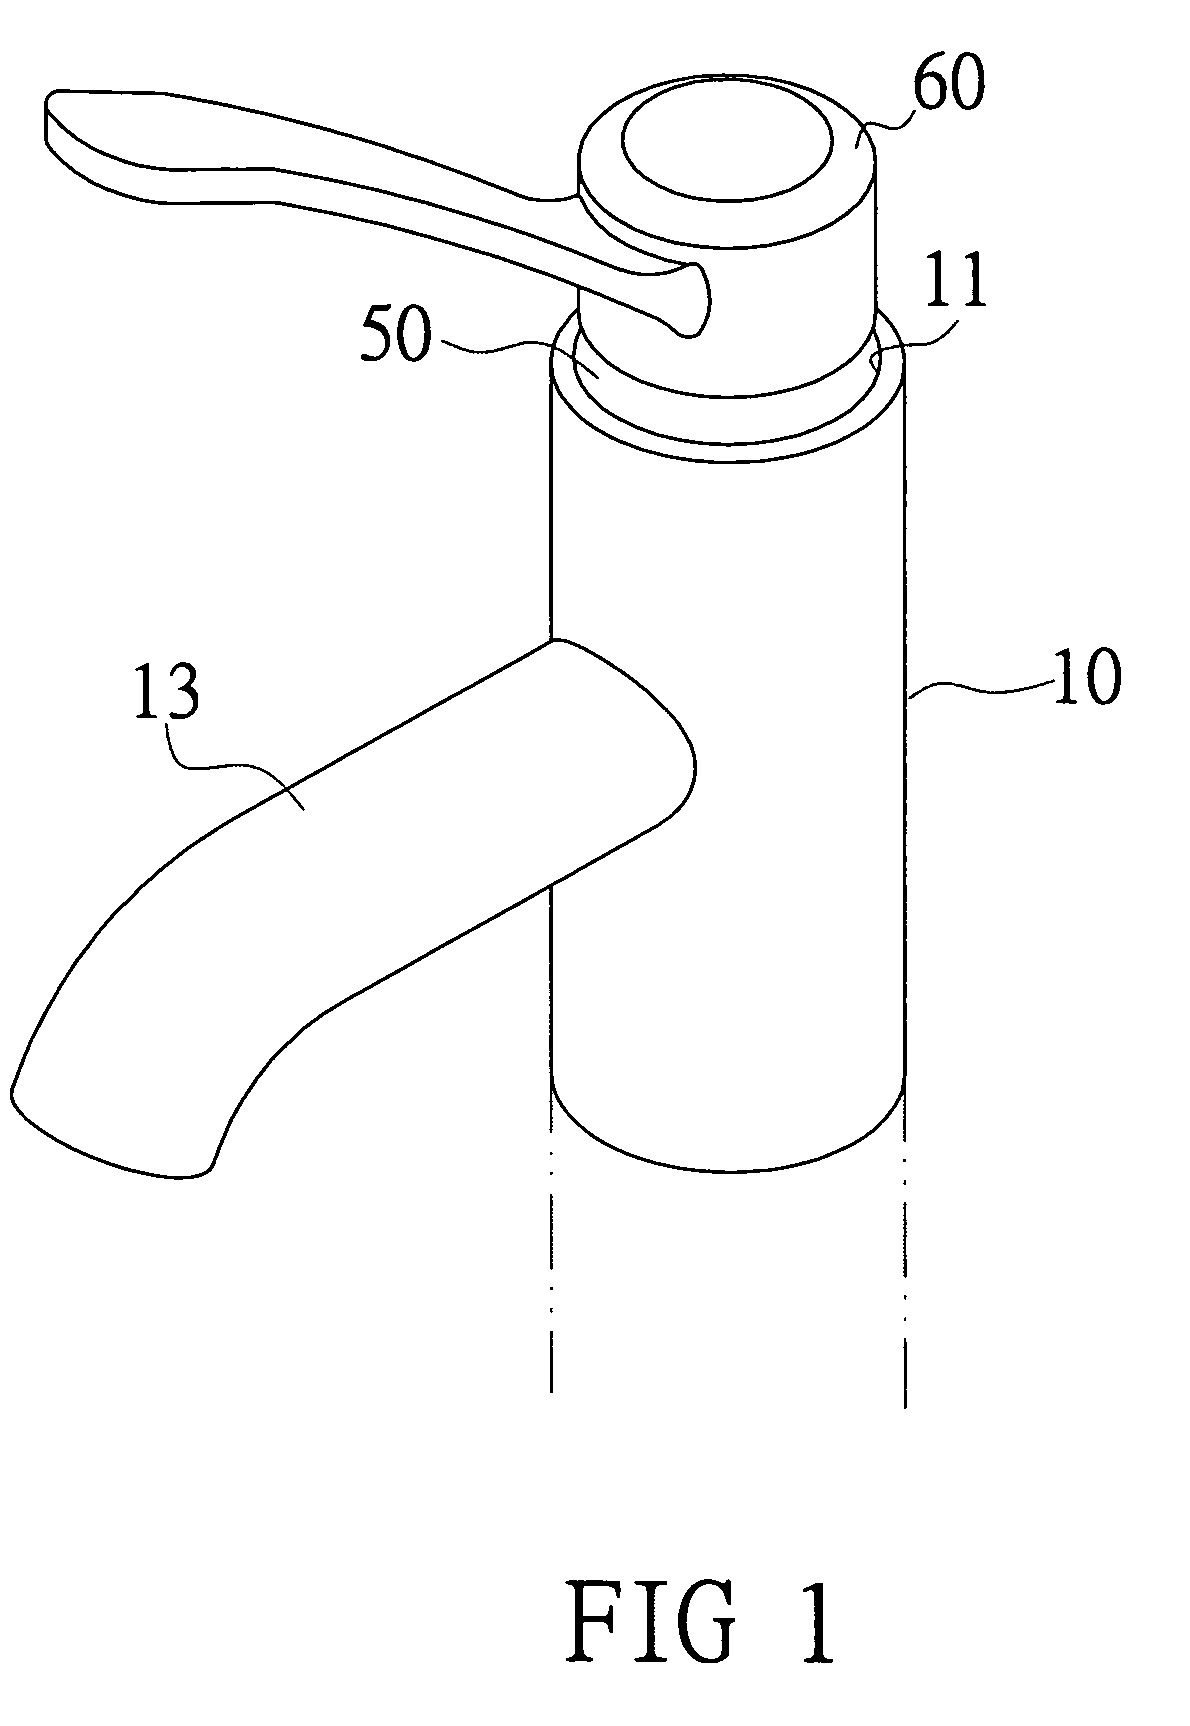 Standing pipe faucet assembly